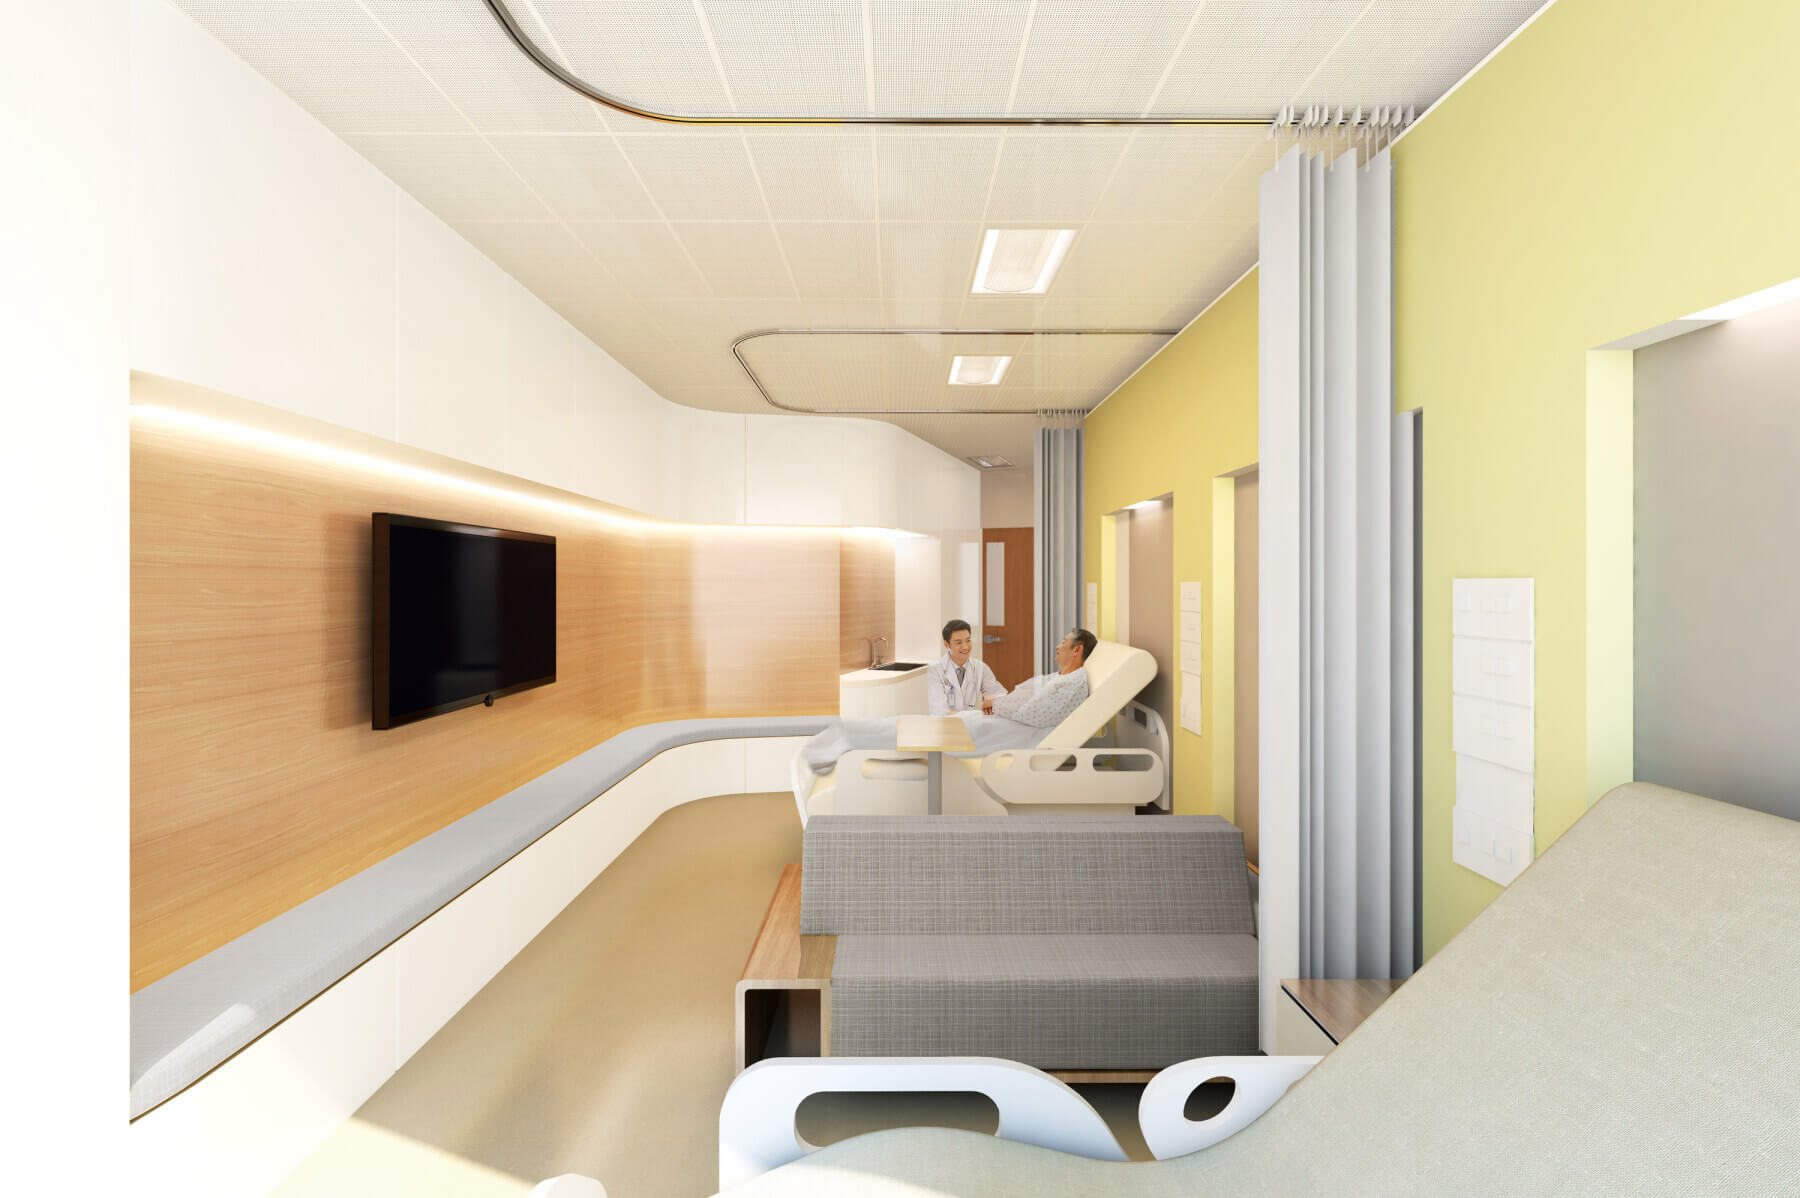 : interior rendering of a patient room in the hospital